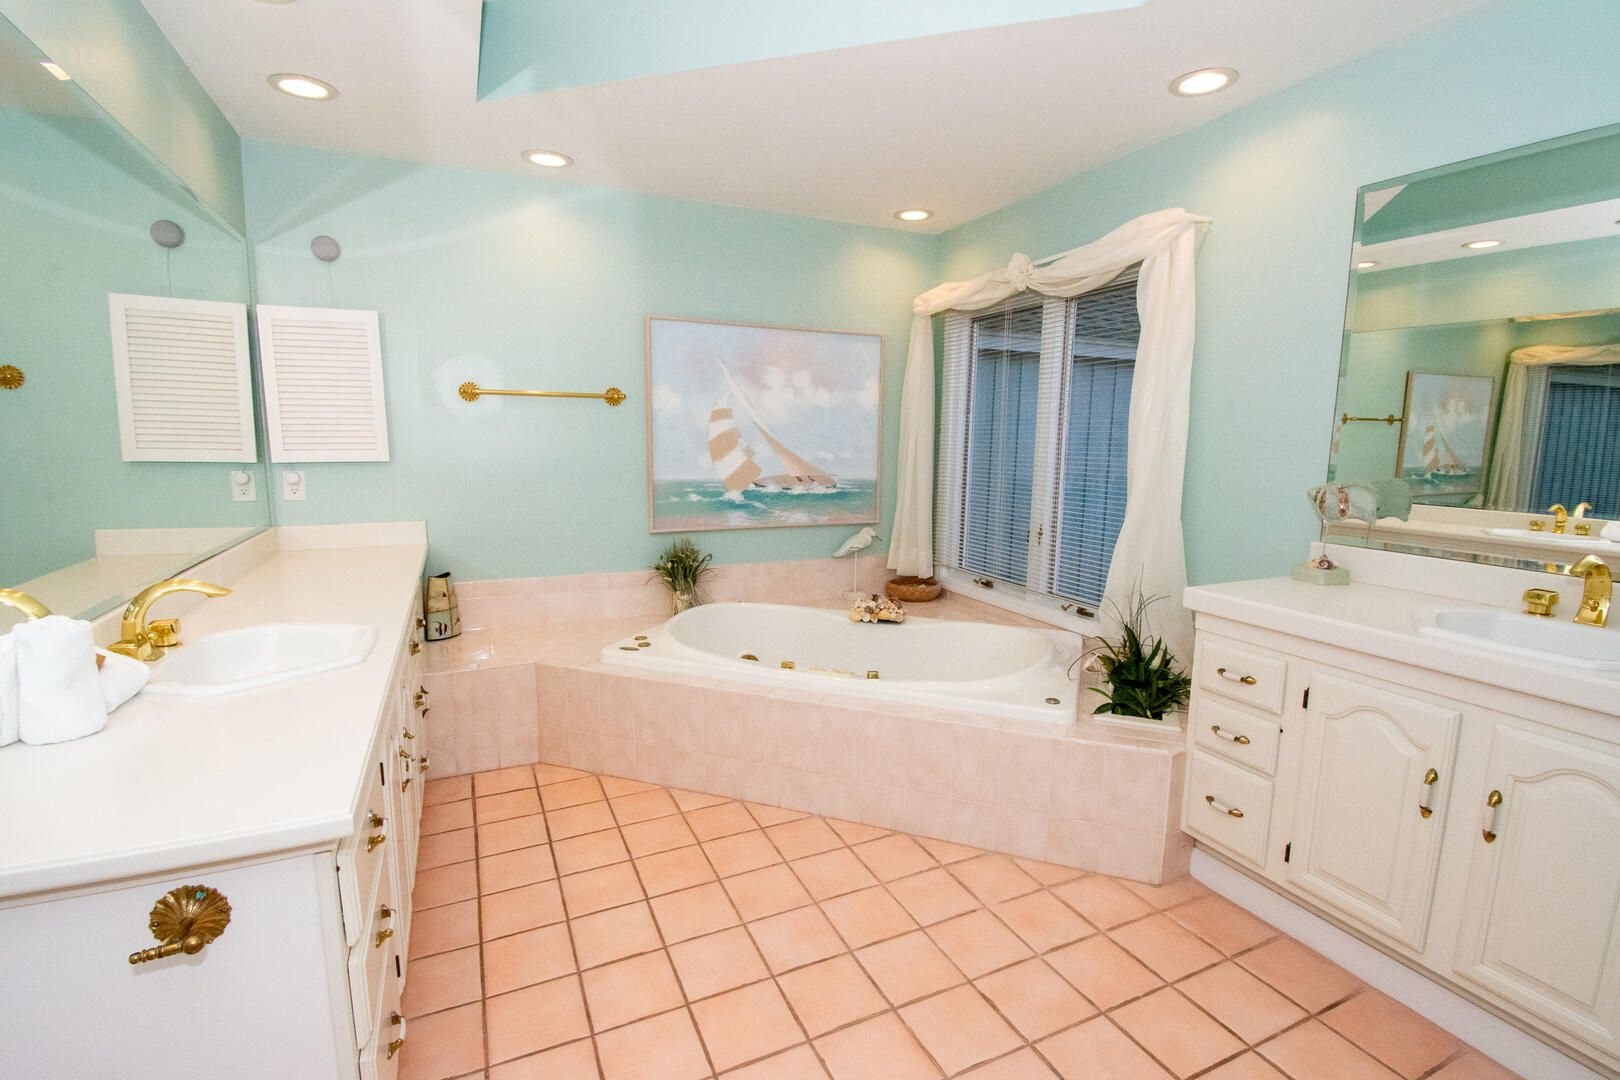 large bath with double vanities, 
soaking tub, and walk-in shower